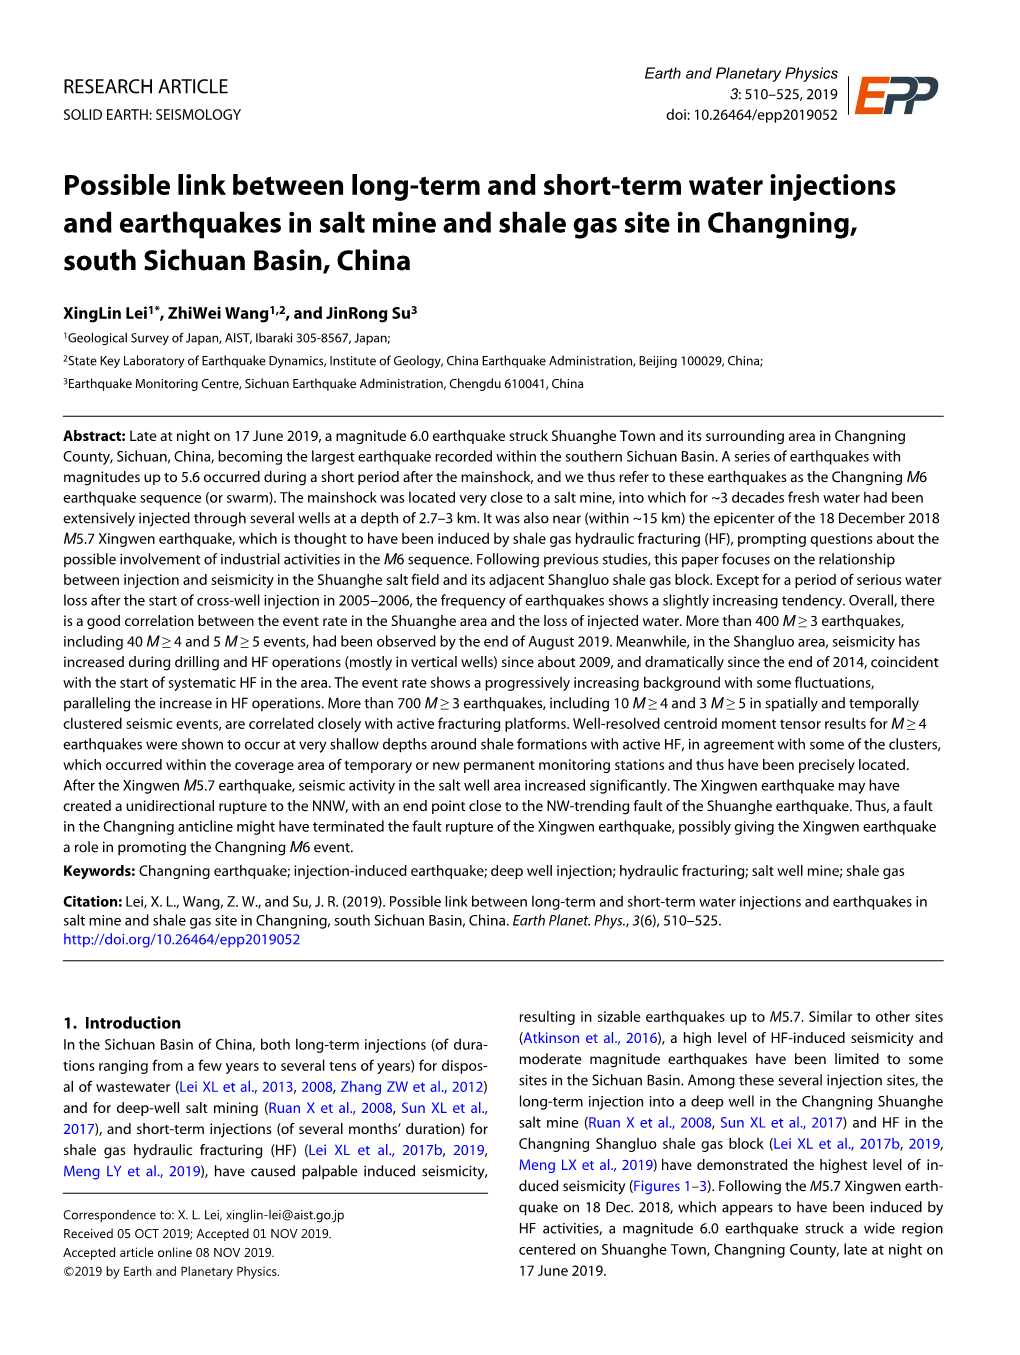 Possible Link Between Long-Term and Short-Term Water Injections and Earthquakes in Salt Mine and Shale Gas Site in Changning, South Sichuan Basin, China